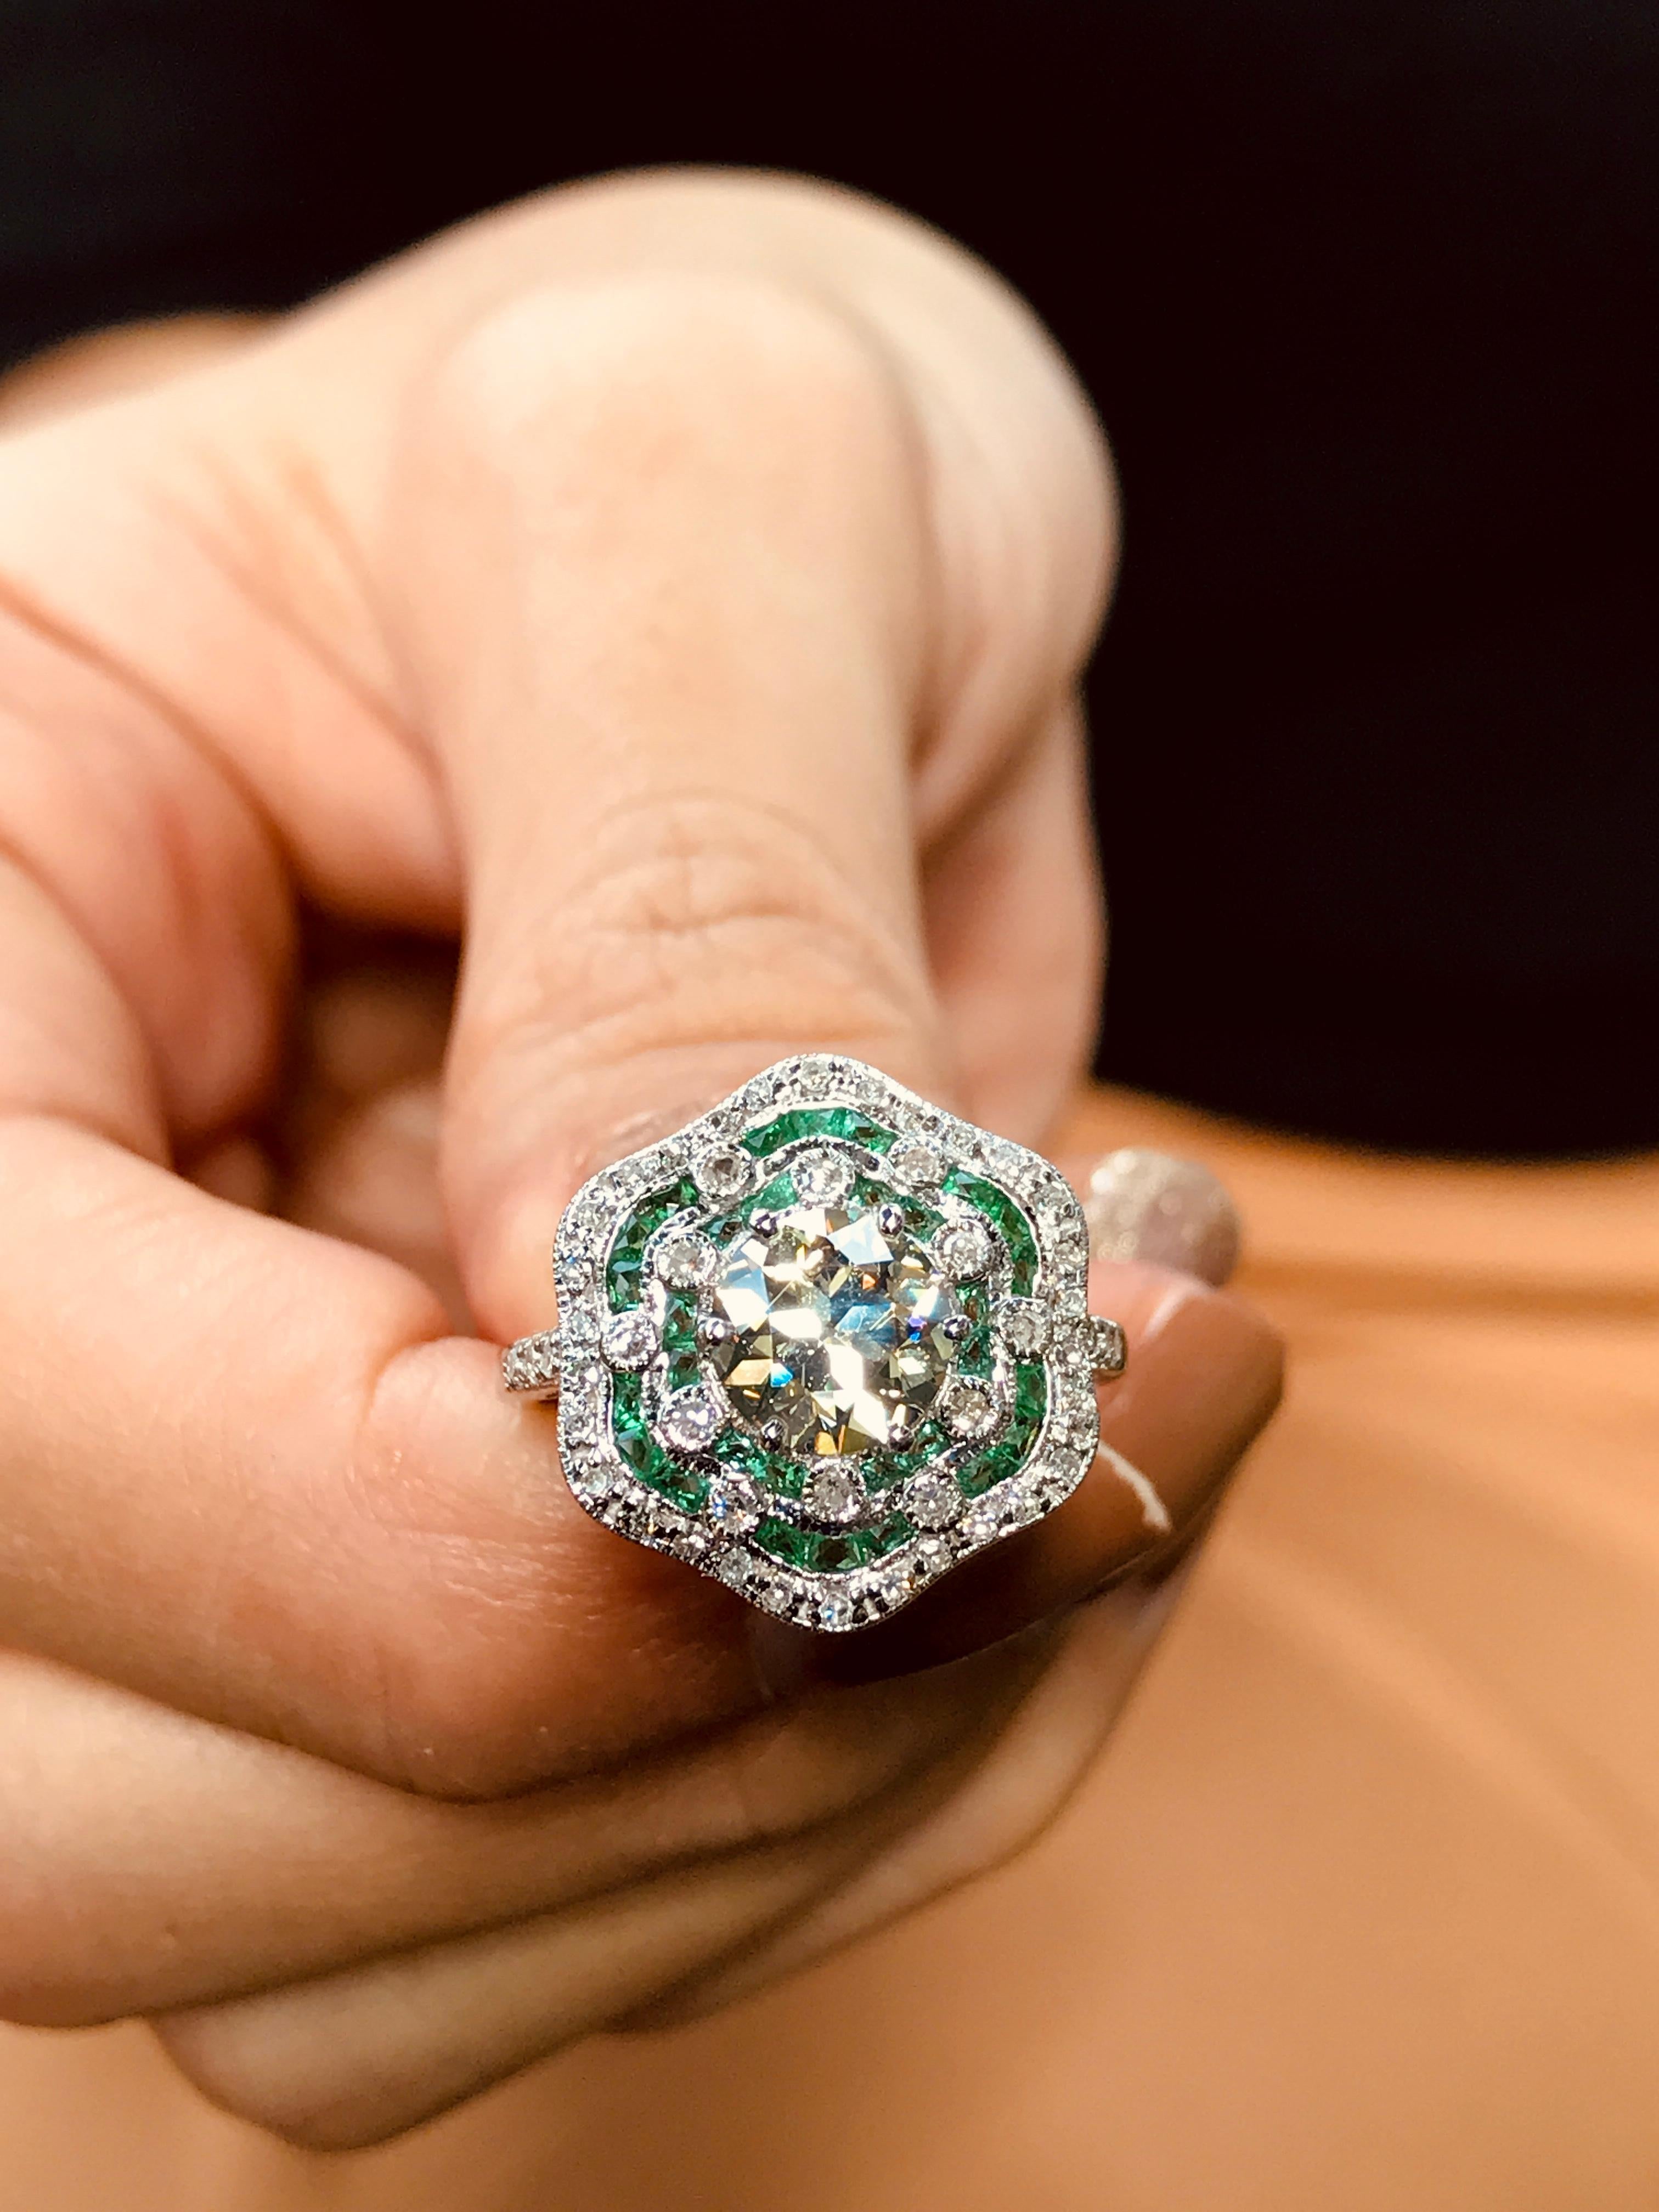 An elegant Art Deco inspired engagement ring is set with an antique old cut fancy yellow diamond and adorned with diamonds and millgrain. The diamond surrounded with vibrant green emeralds accented with round brilliant cut diamonds. Handcrafted in